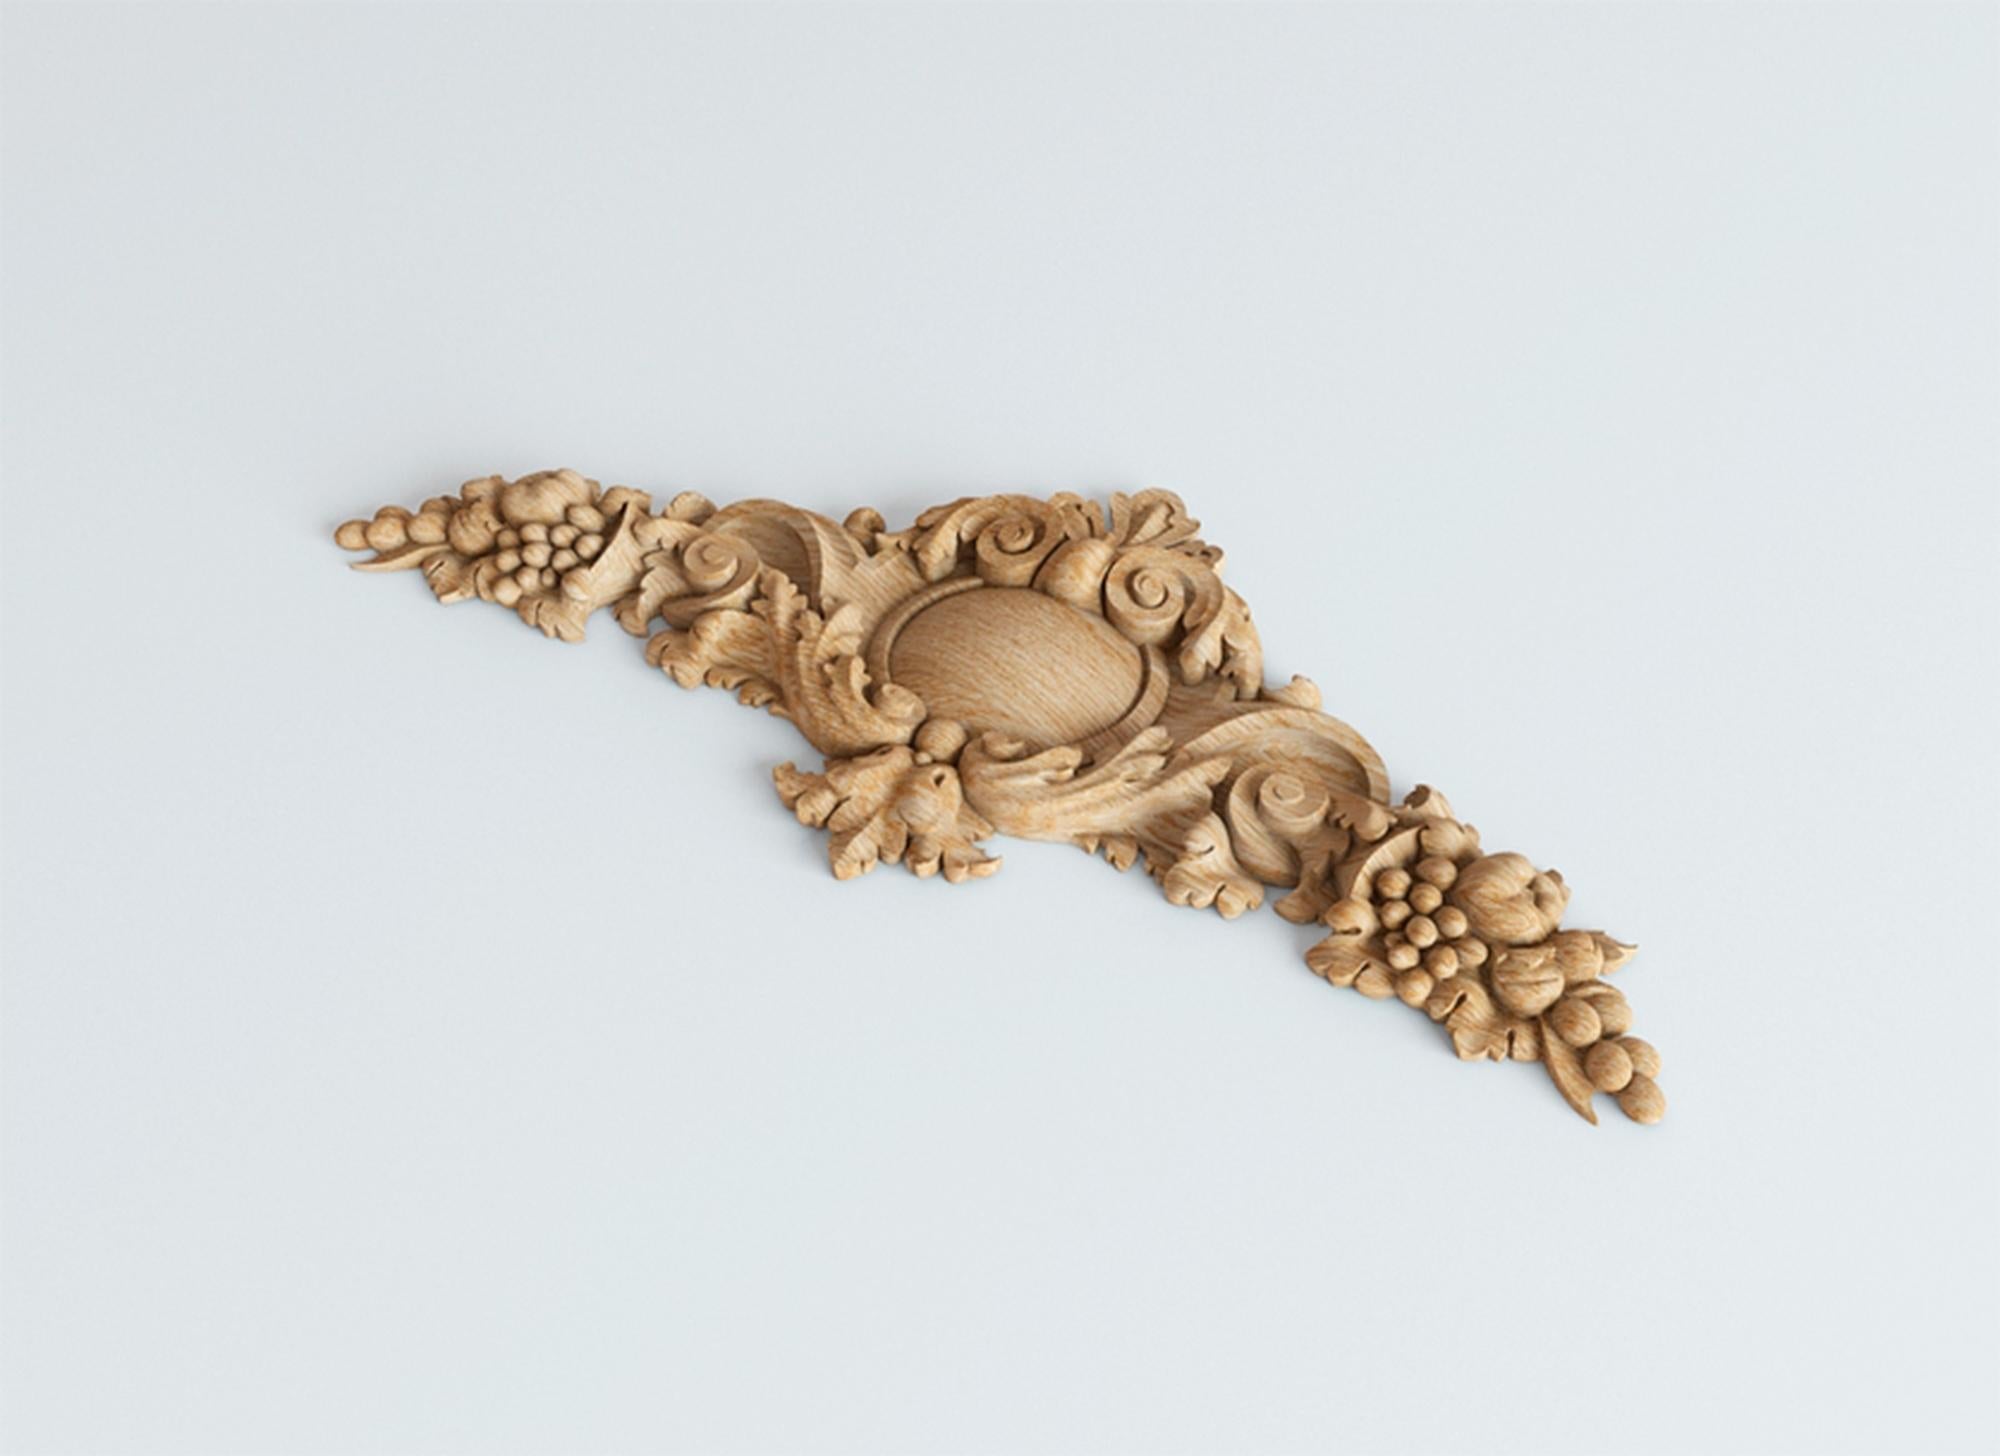 Hiqh Quality Unfinished Wall Applique for Interior, Millwork Wood Onlay In New Condition For Sale In St Petersburg, St Petersburg